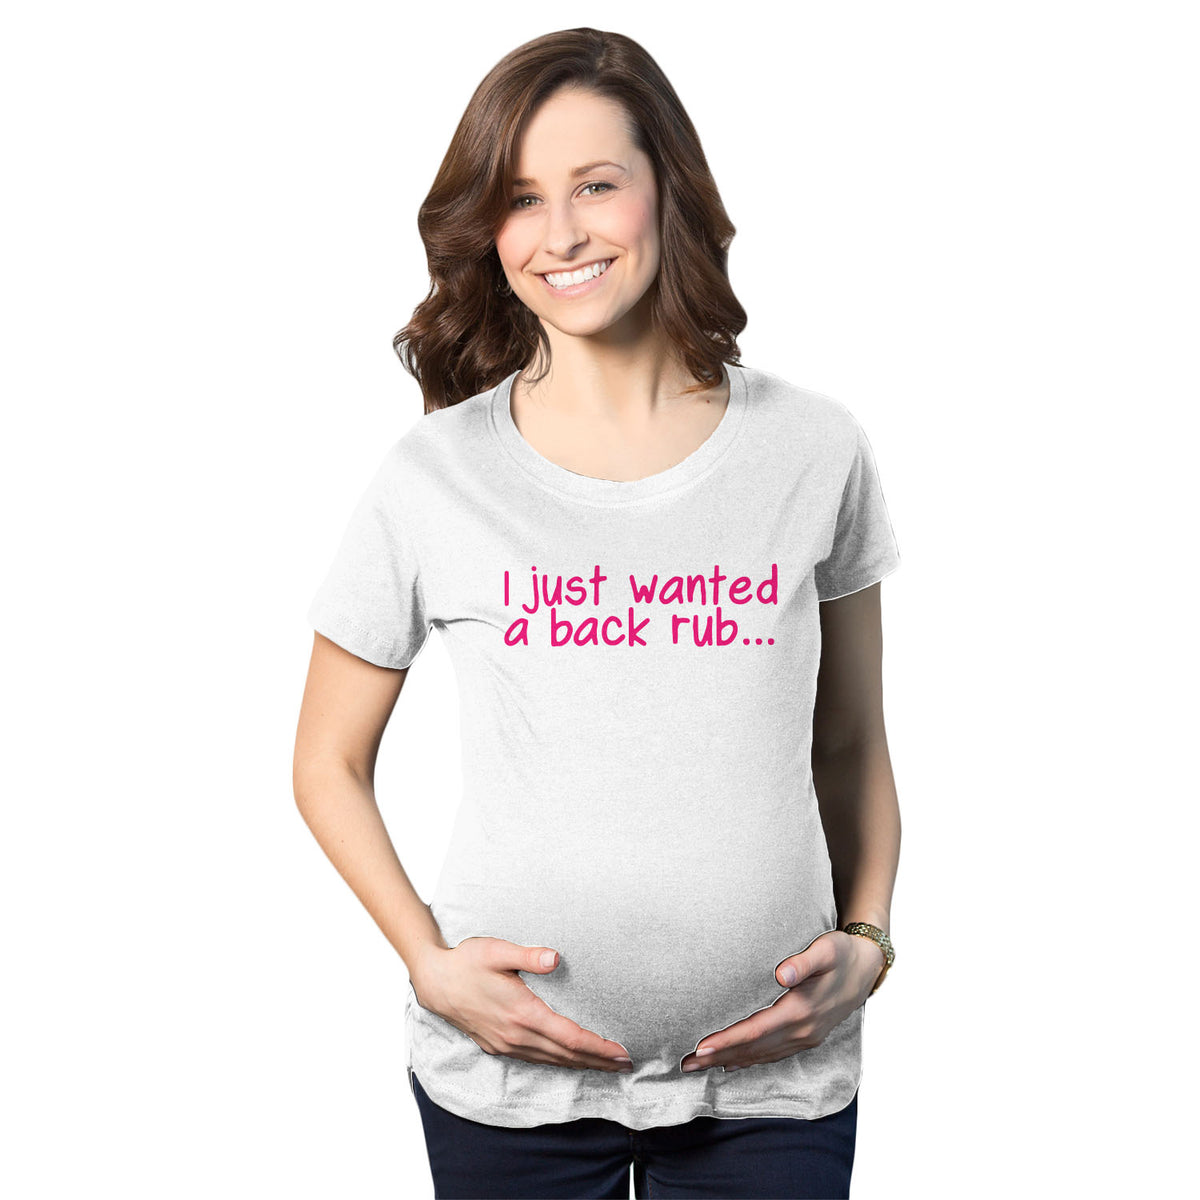 Funny White I Just Wanted a Back Rub Maternity T Shirt Nerdy Tee